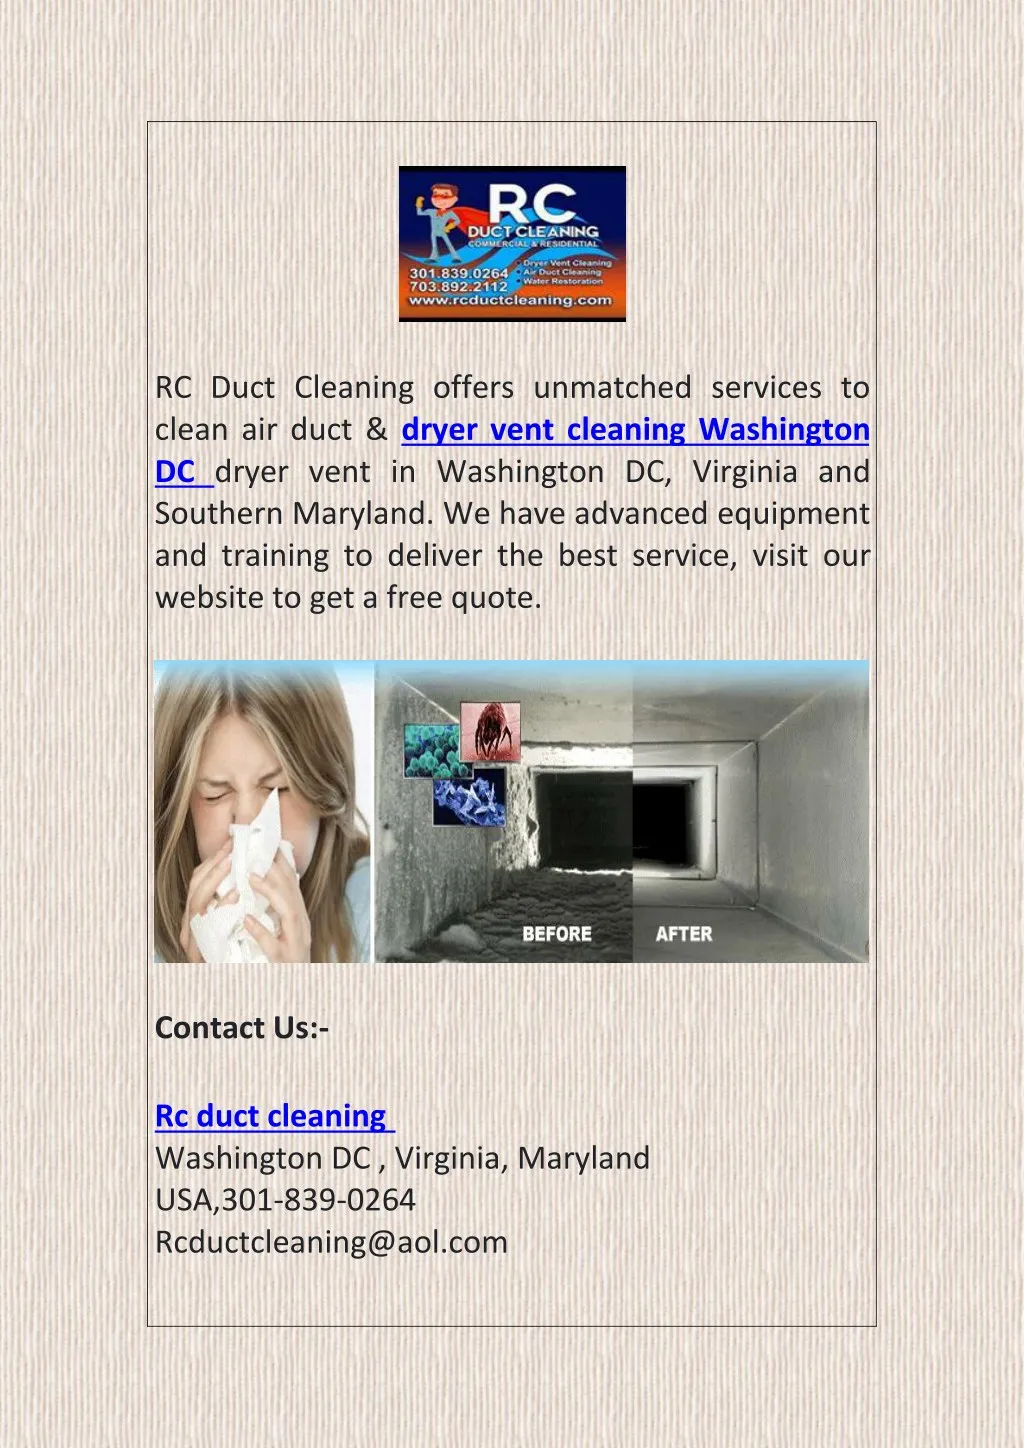 rc duct cleaning offers unmatched services